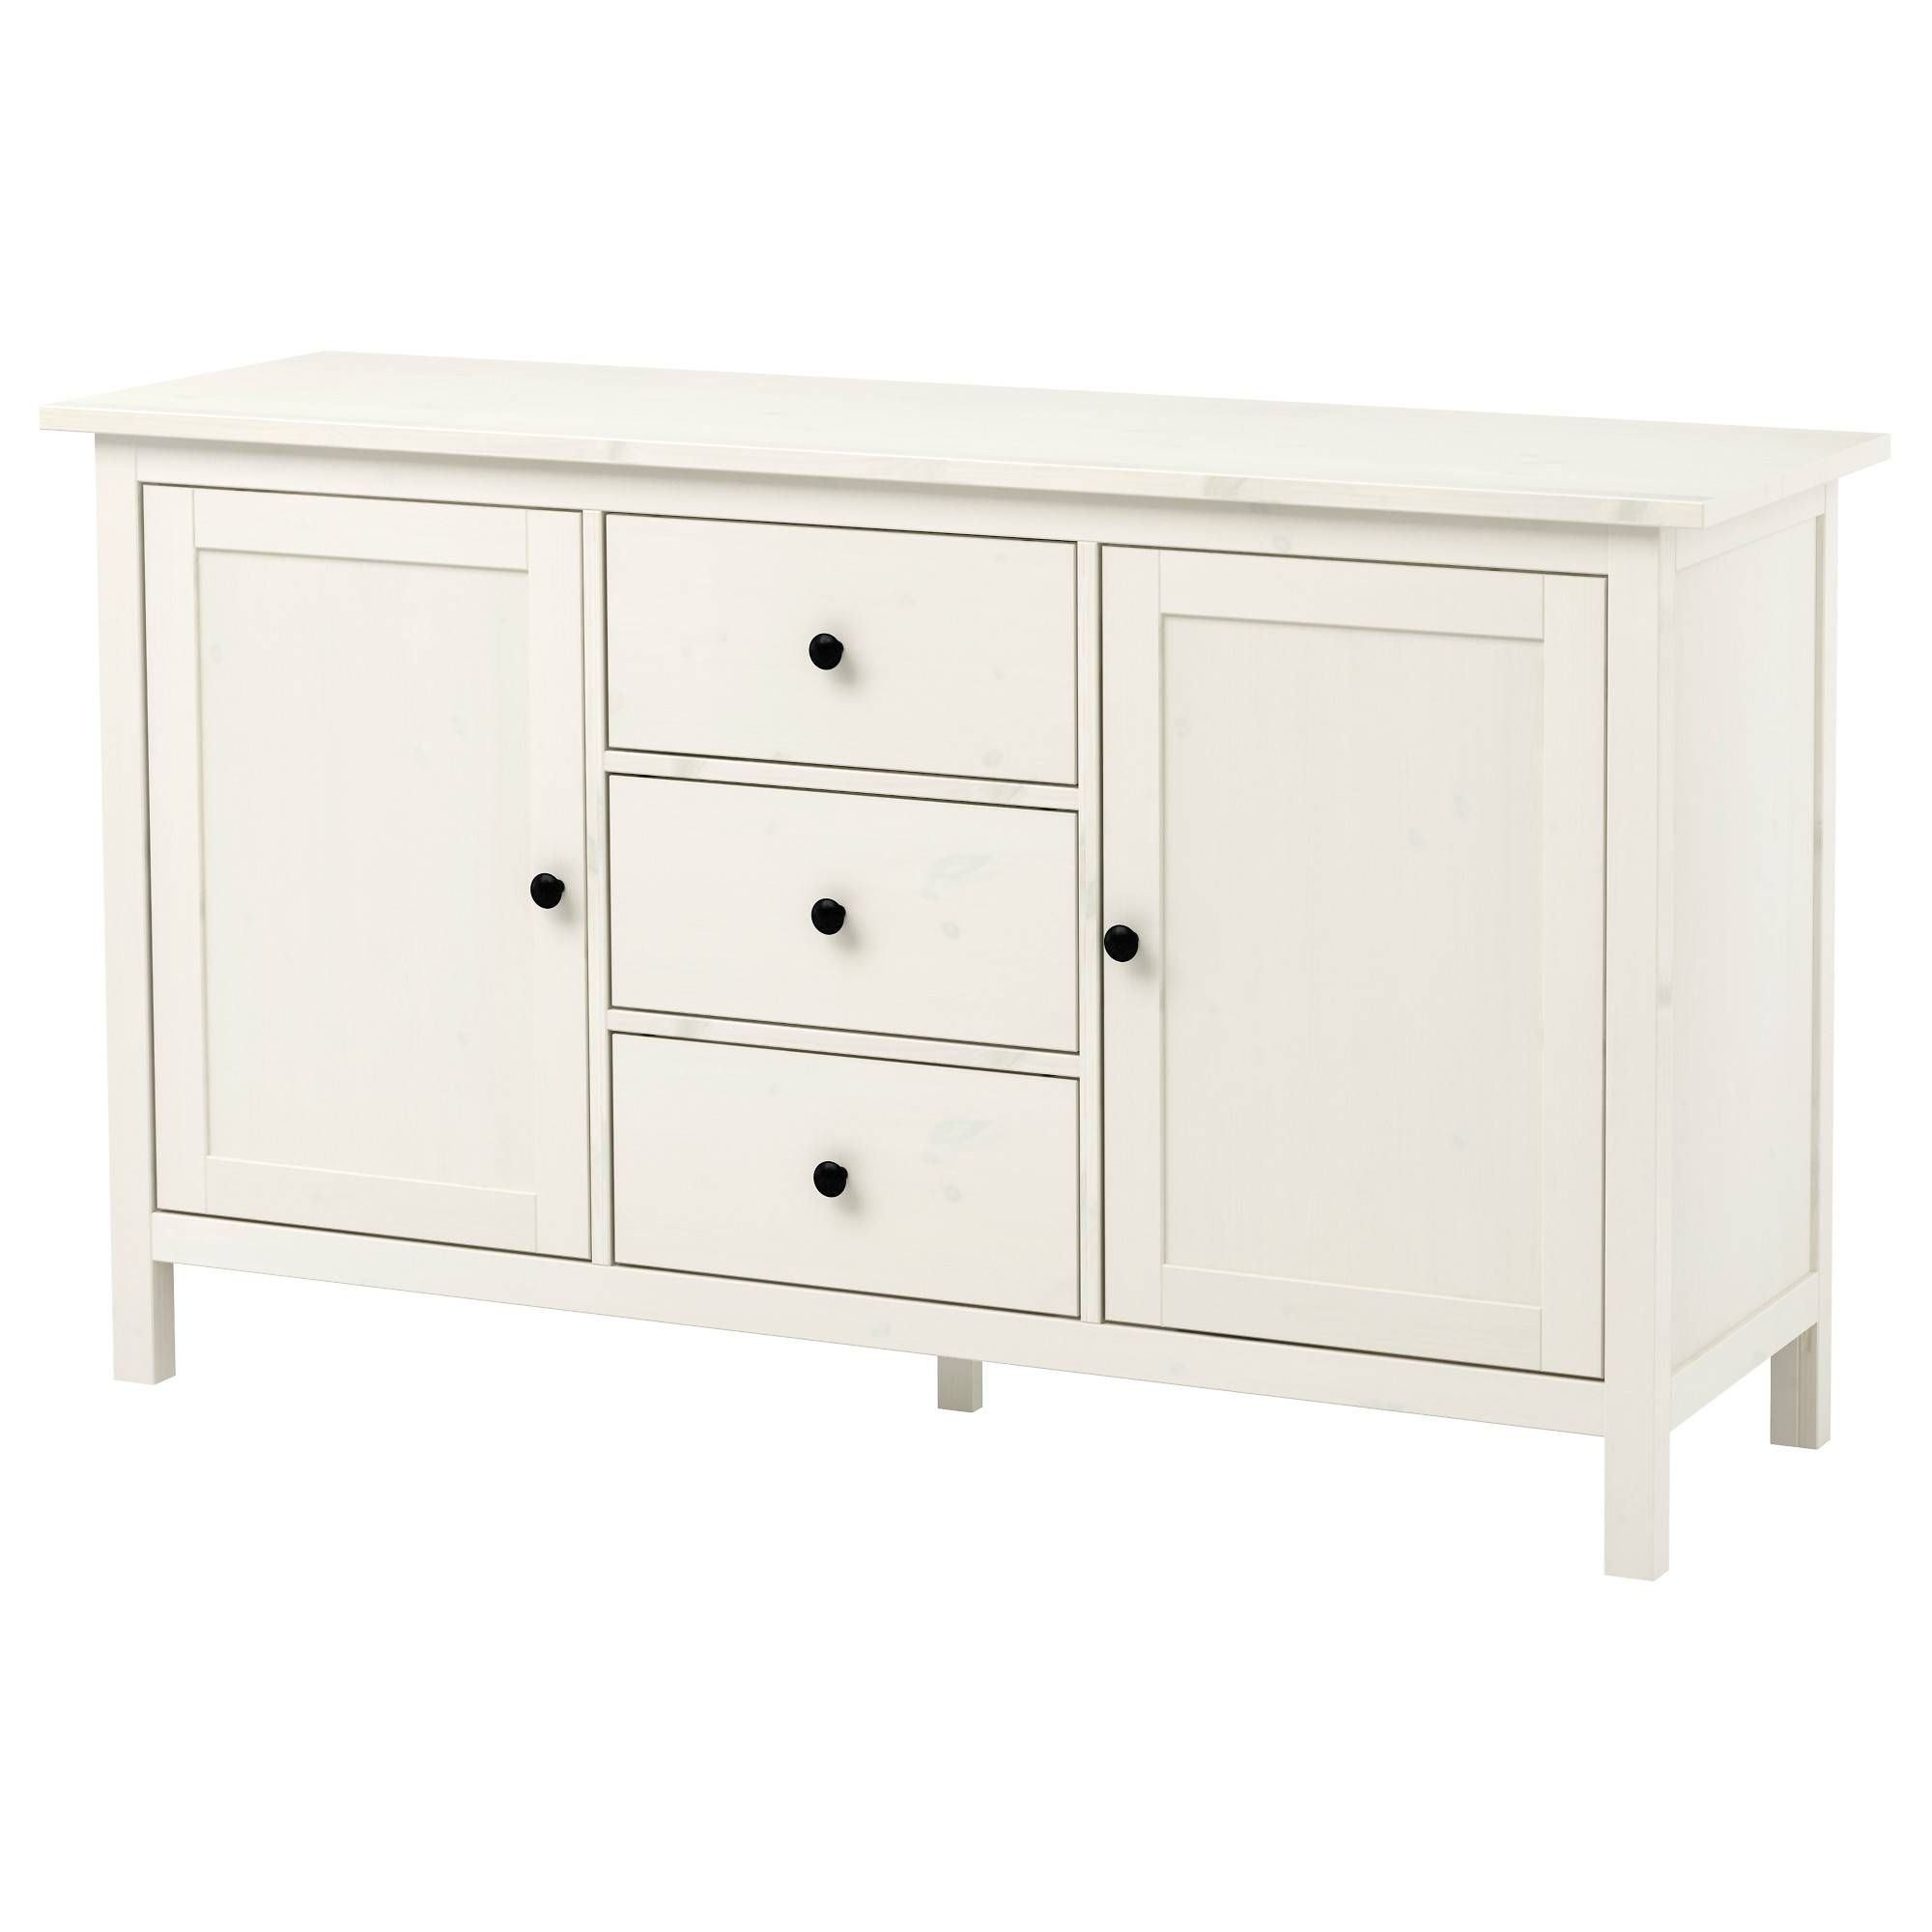 Buffet Tables & Sideboards – Ikea For 12 Inch Deep Sideboards (View 10 of 15)